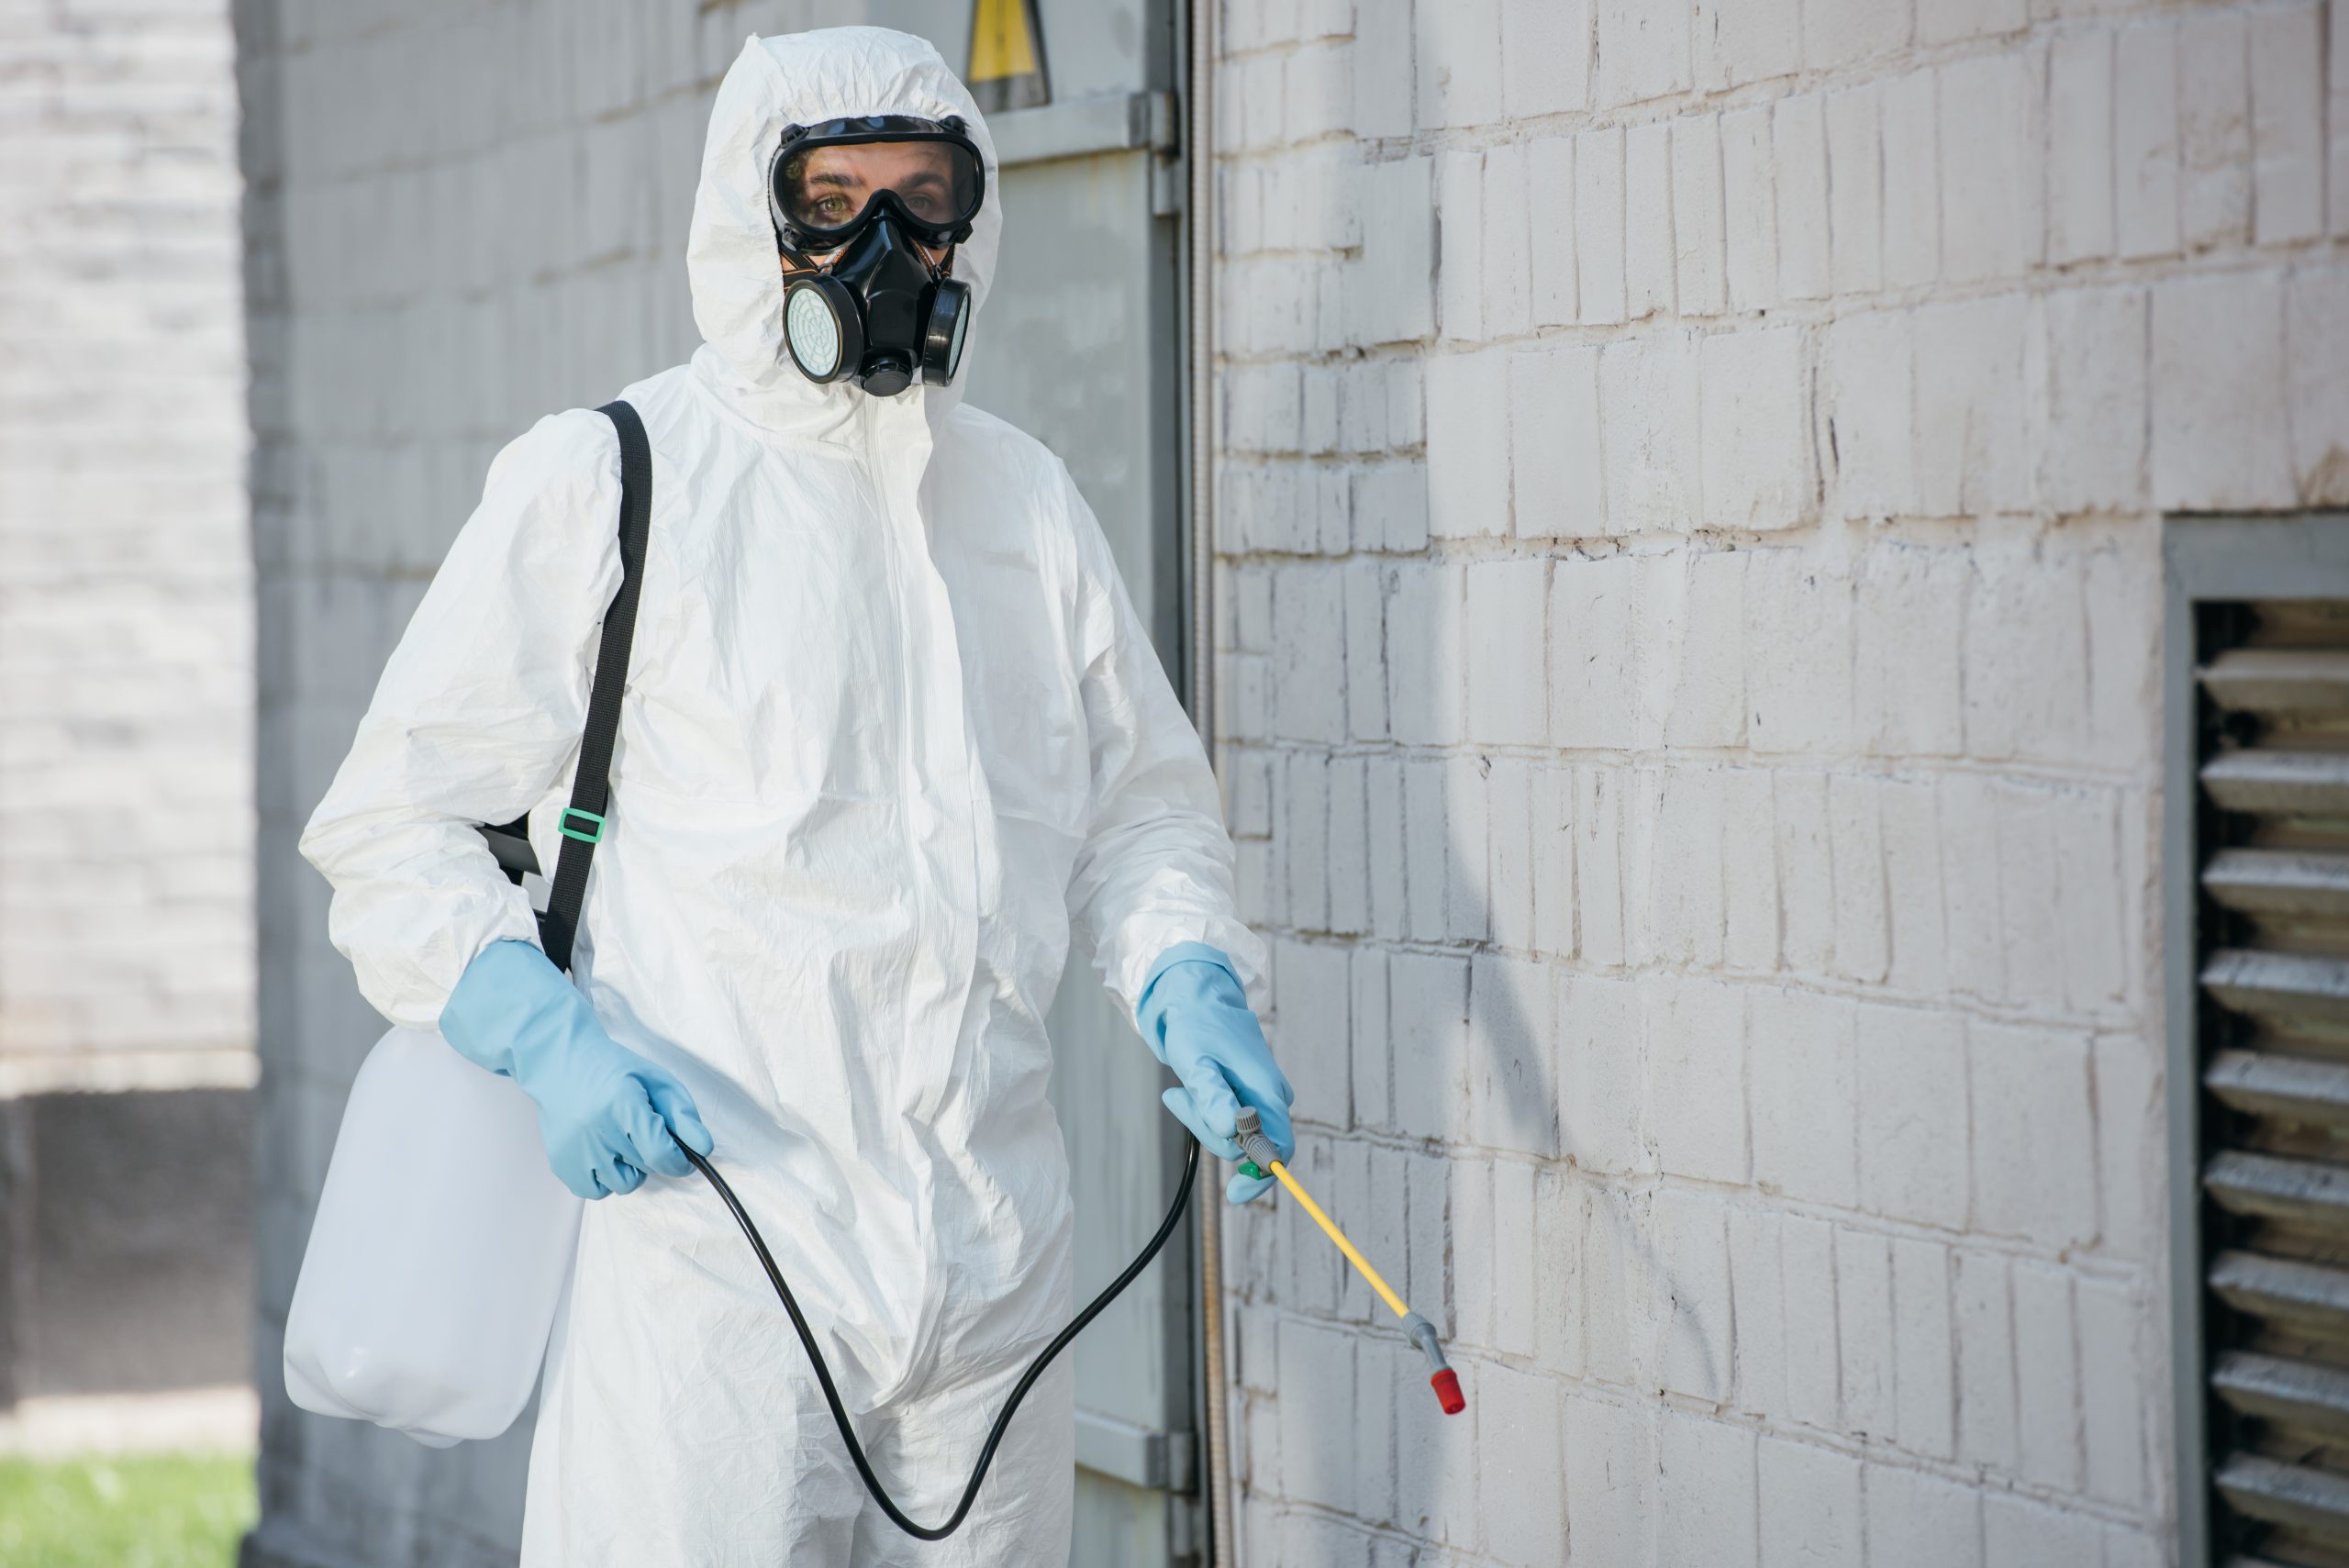 pest control worker in respirator spraying pesticides with sprayer on building wall